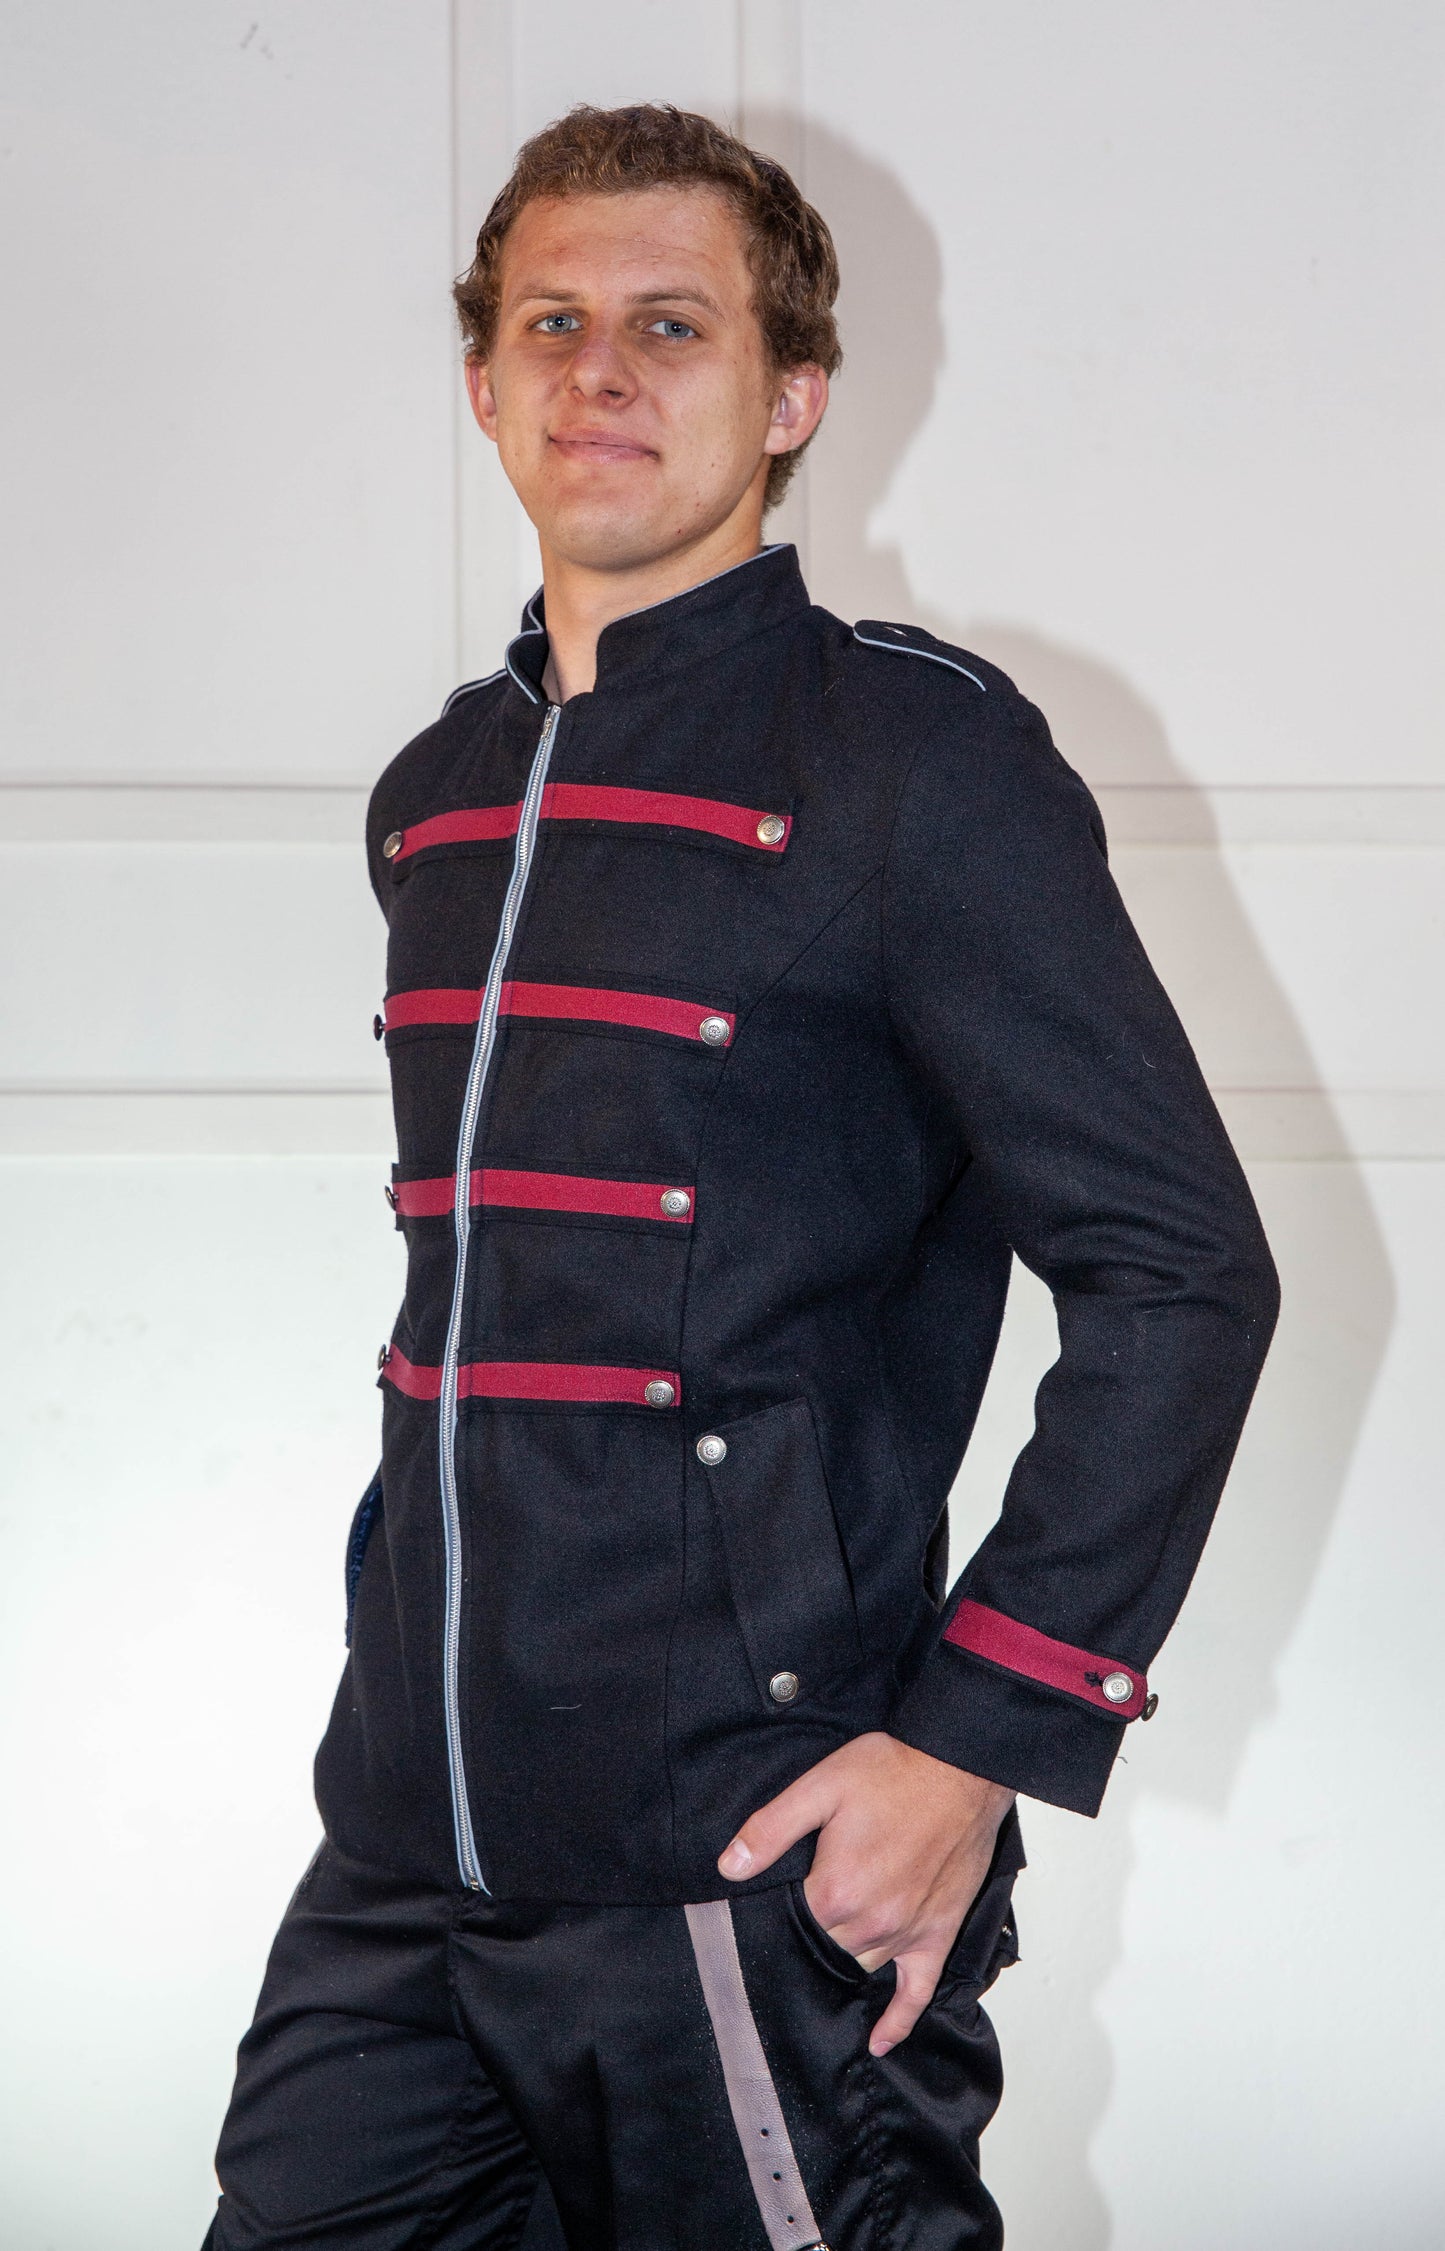 Military Jacket - Black & Red with Light Blue Trim